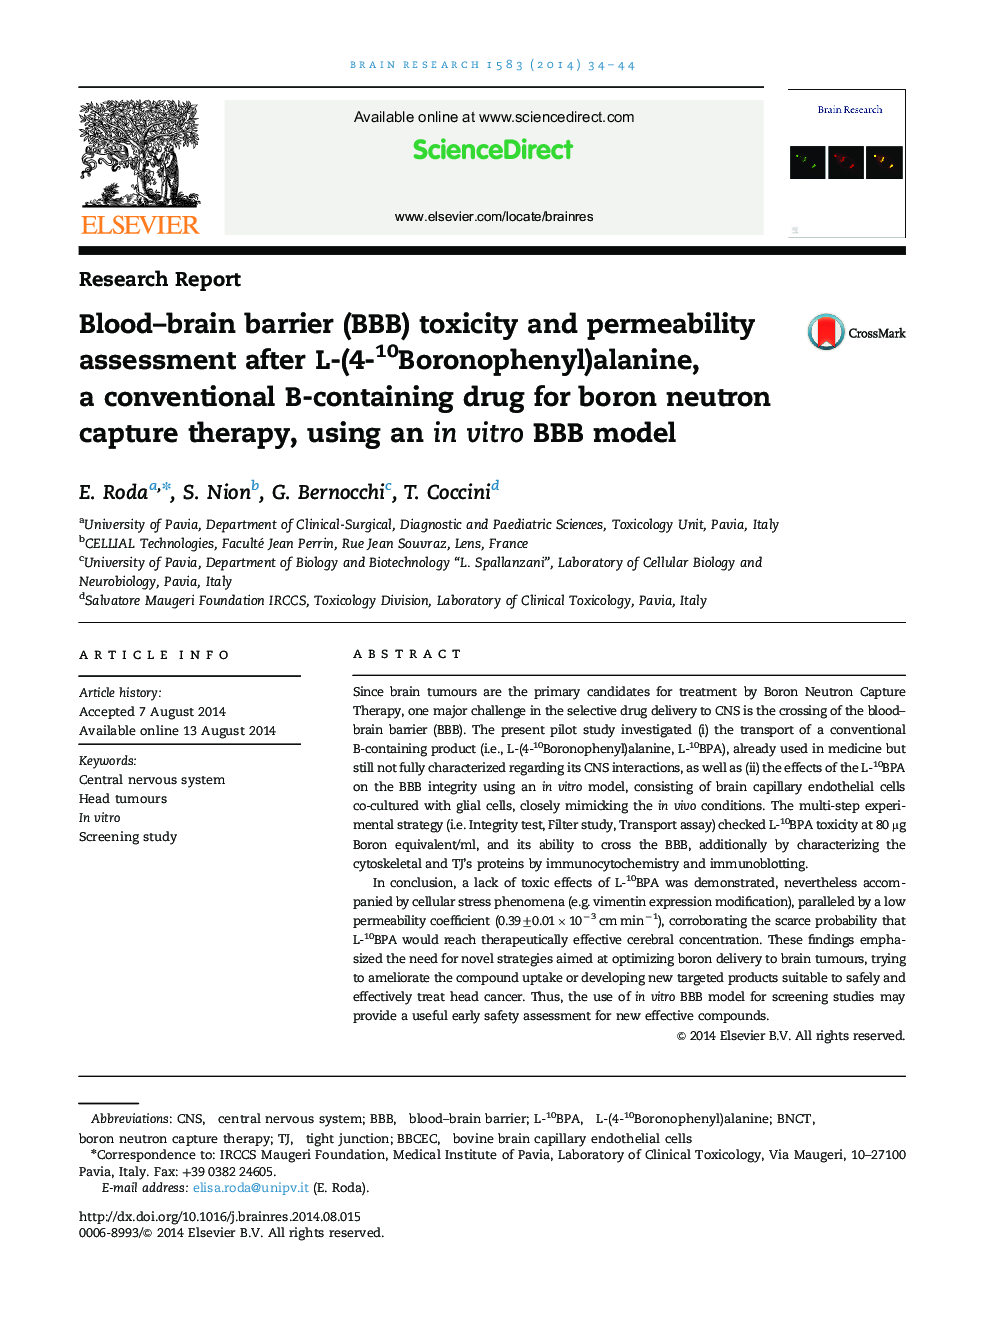 Blood–brain barrier (BBB) toxicity and permeability assessment after L-(4-10Boronophenyl)alanine, a conventional B-containing drug for boron neutron capture therapy, using an in vitro BBB model